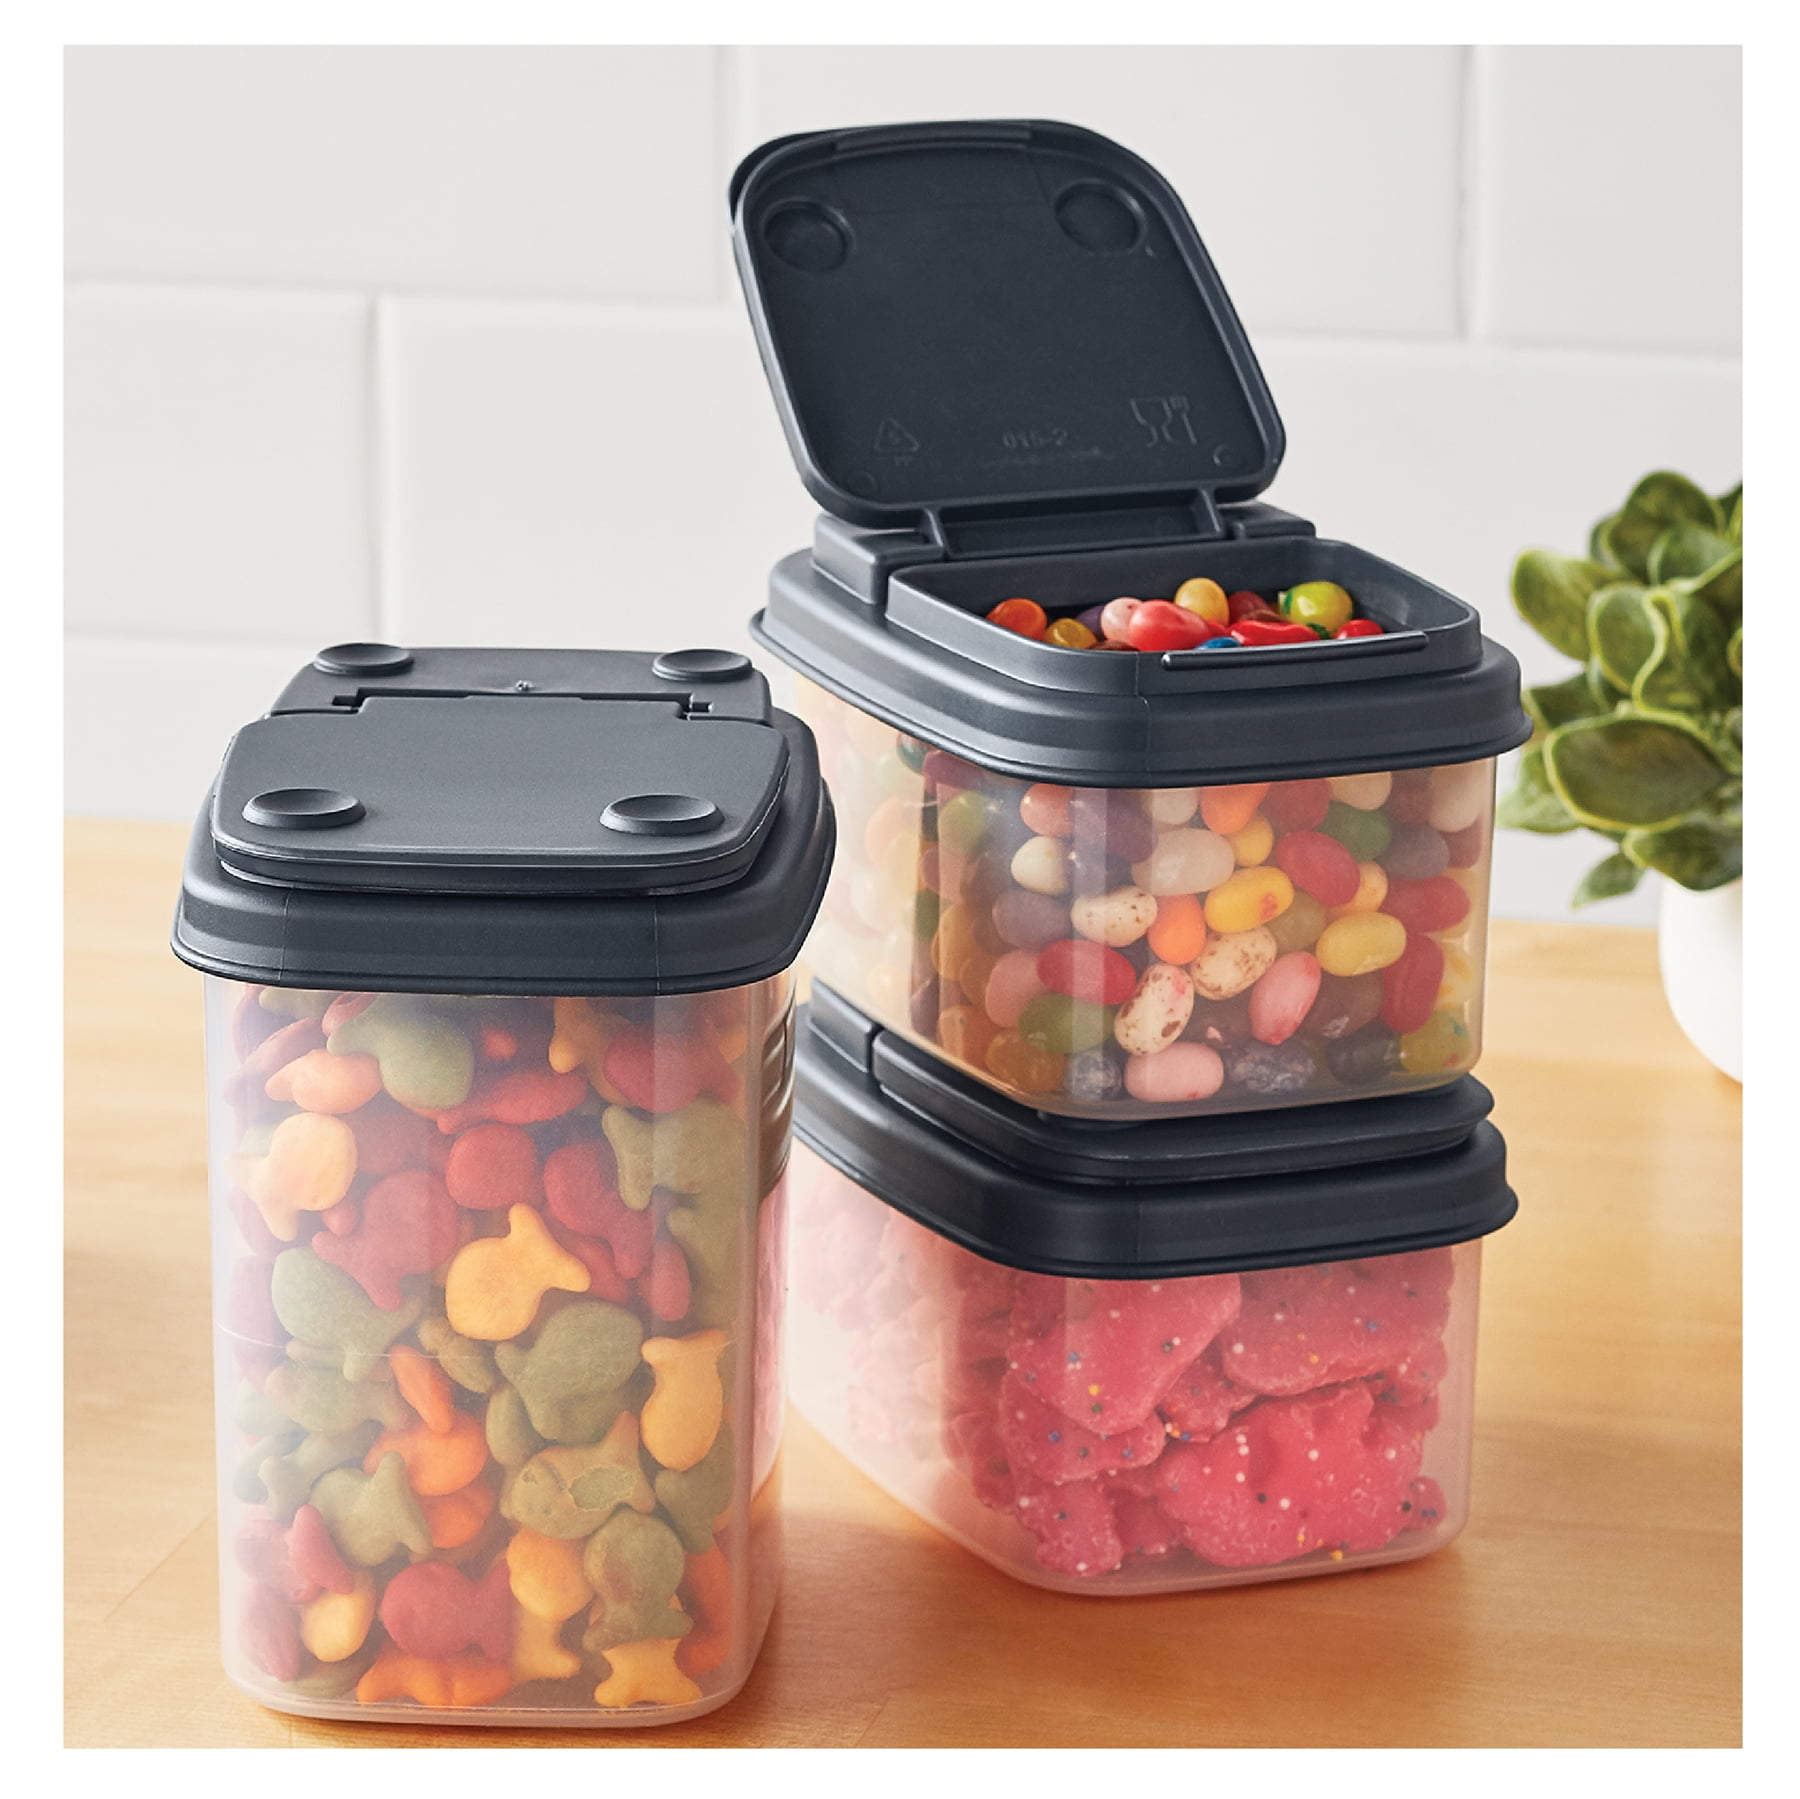 CHIP CONTAINERS FOR PANTRY】 